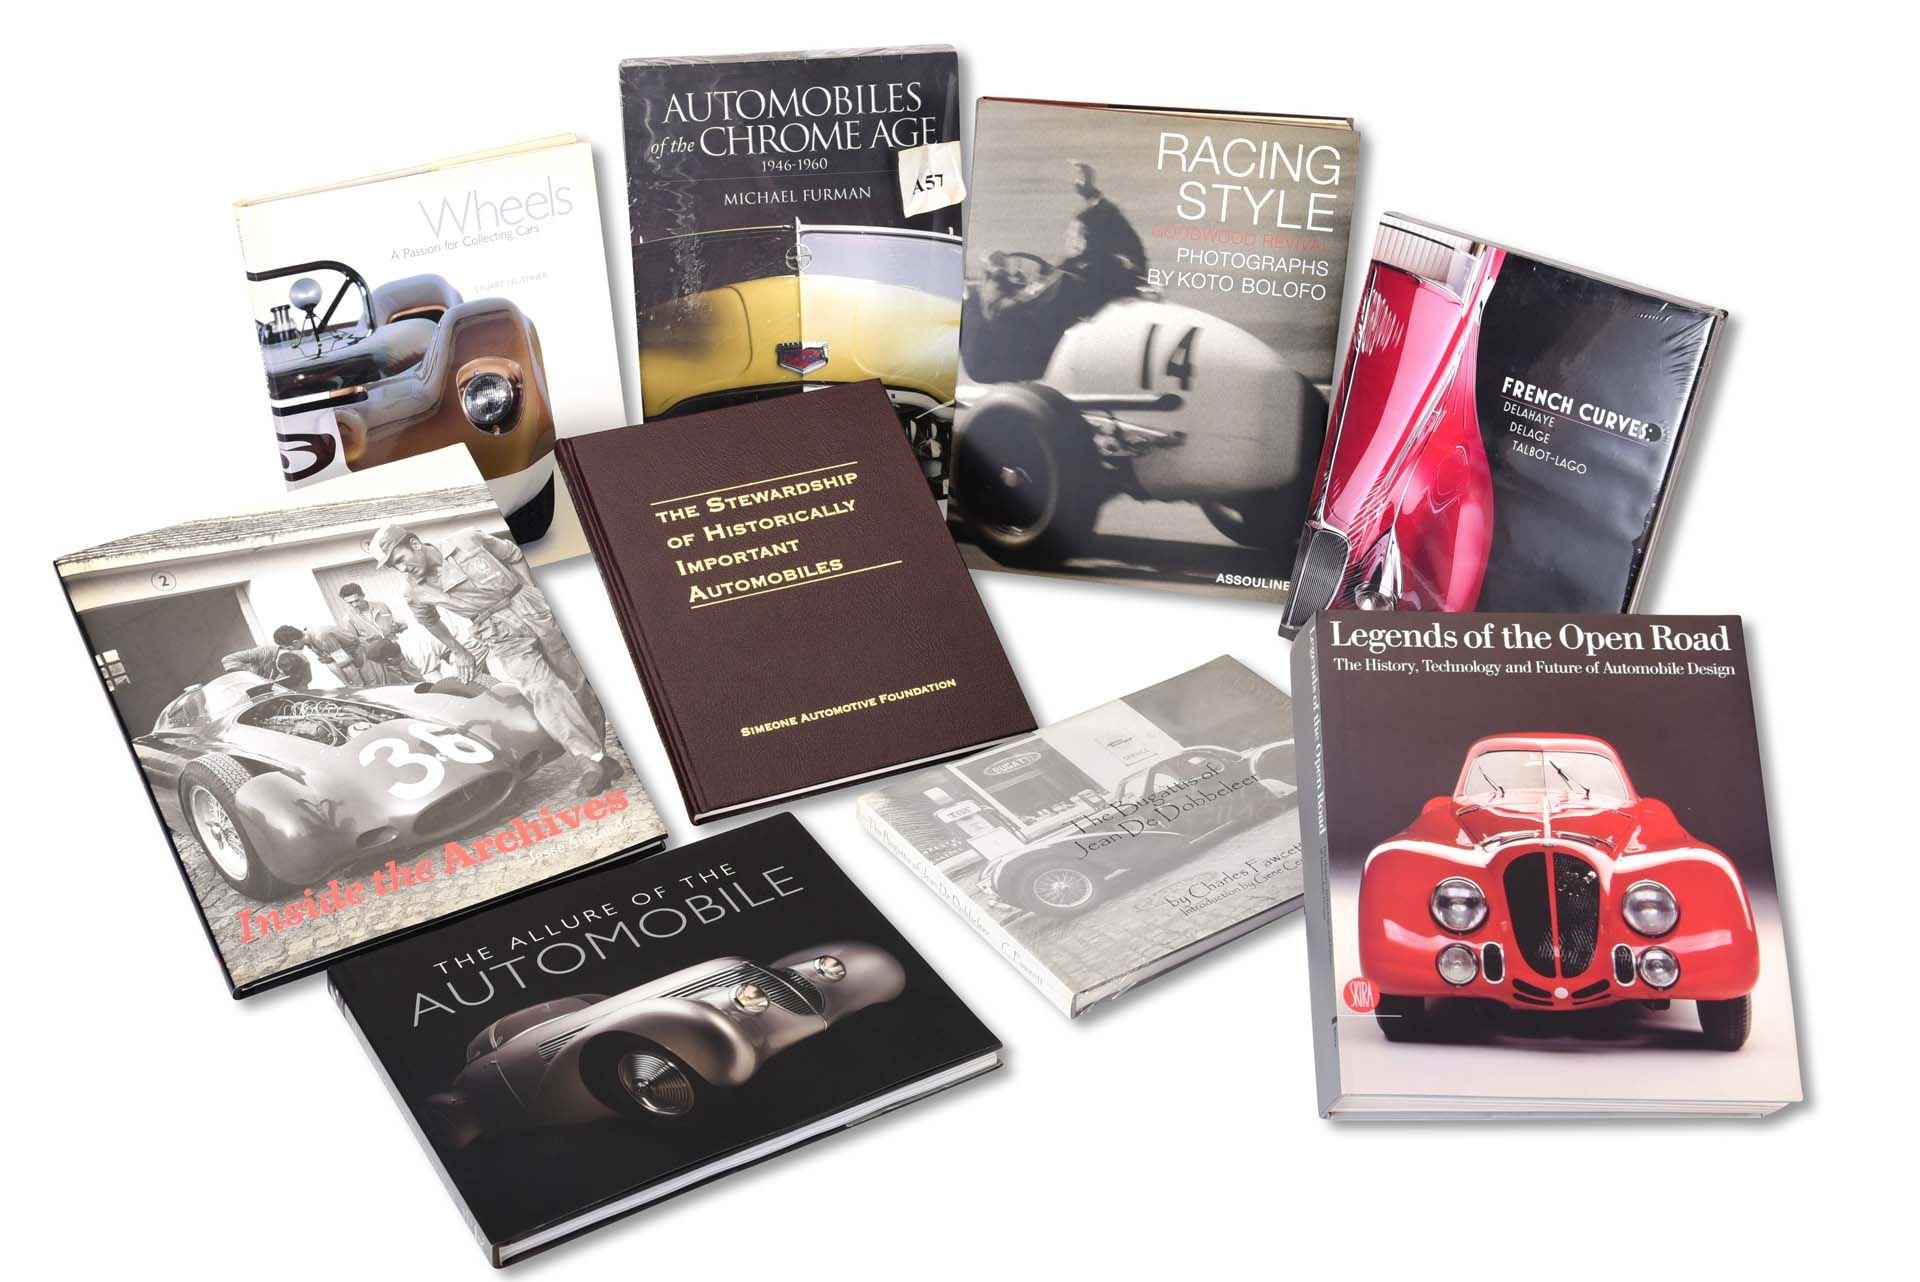 For Sale Automotive Design and Coffee Table Books Including Racing Style and French Curves